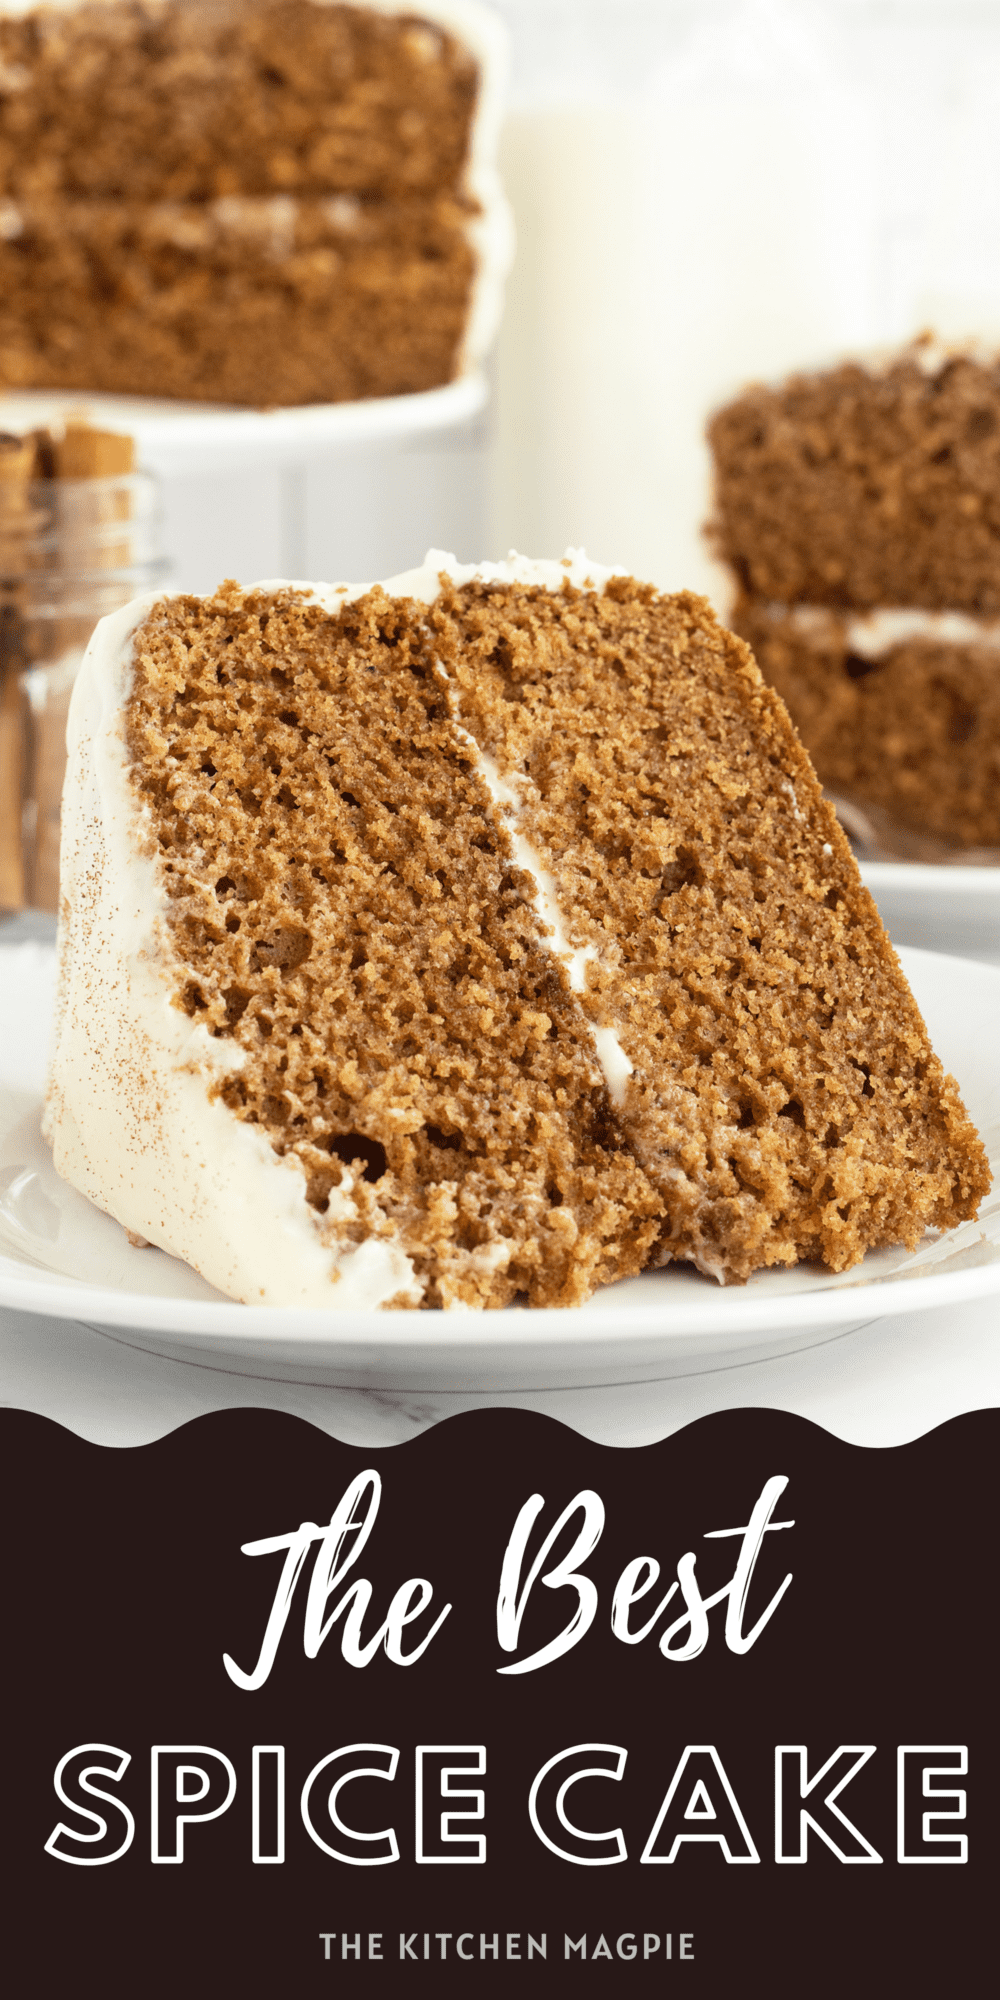 This recipe makes for a spicy, juicy, and rich cake that combines a bunch of different warming spices into a supple, moist, and delectable cake.